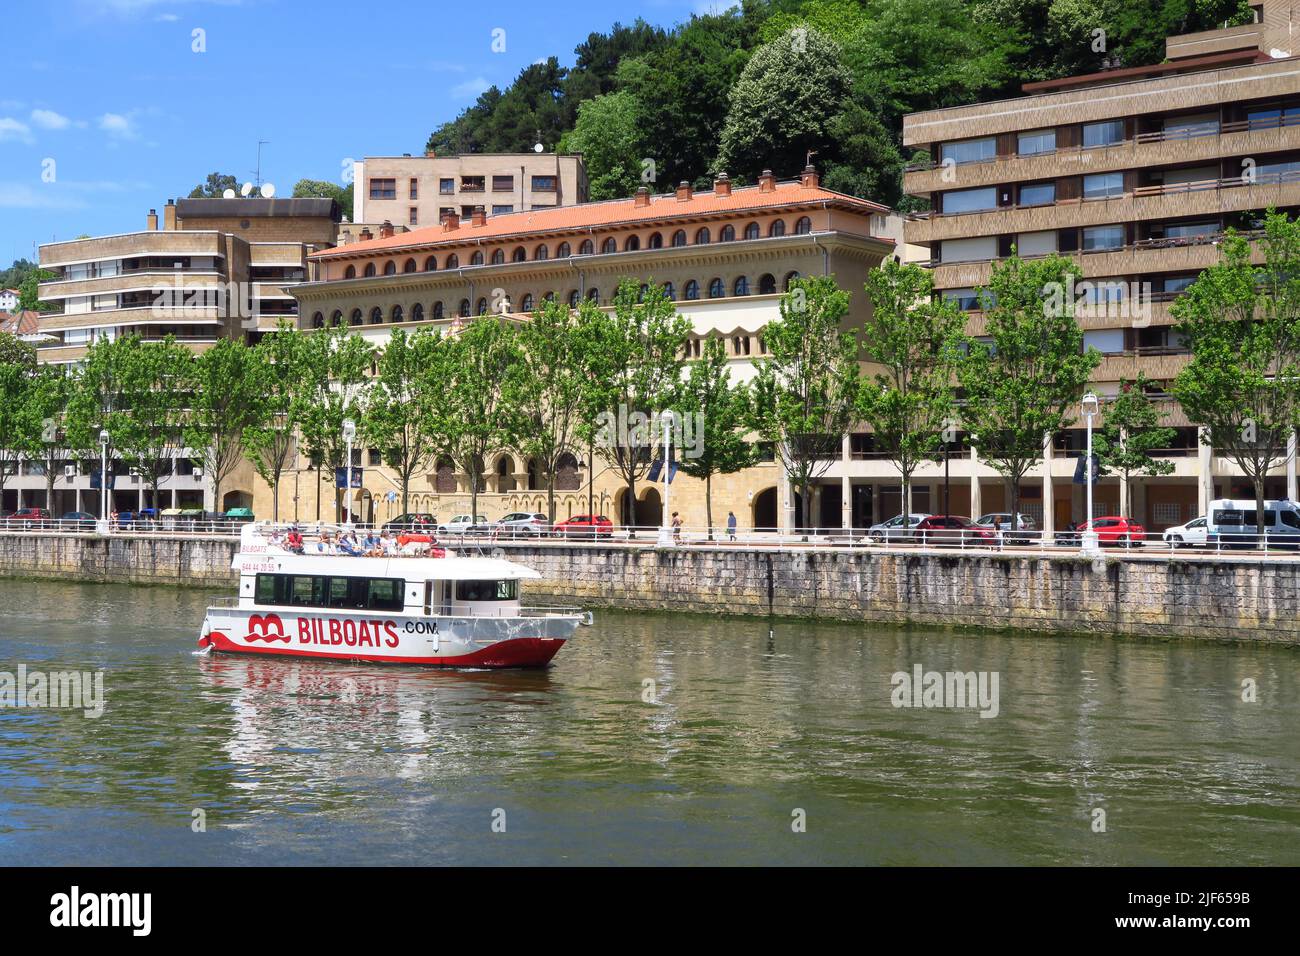 A tourist boat sailing upriver in the Spanish city of Bilbao Stock Photo